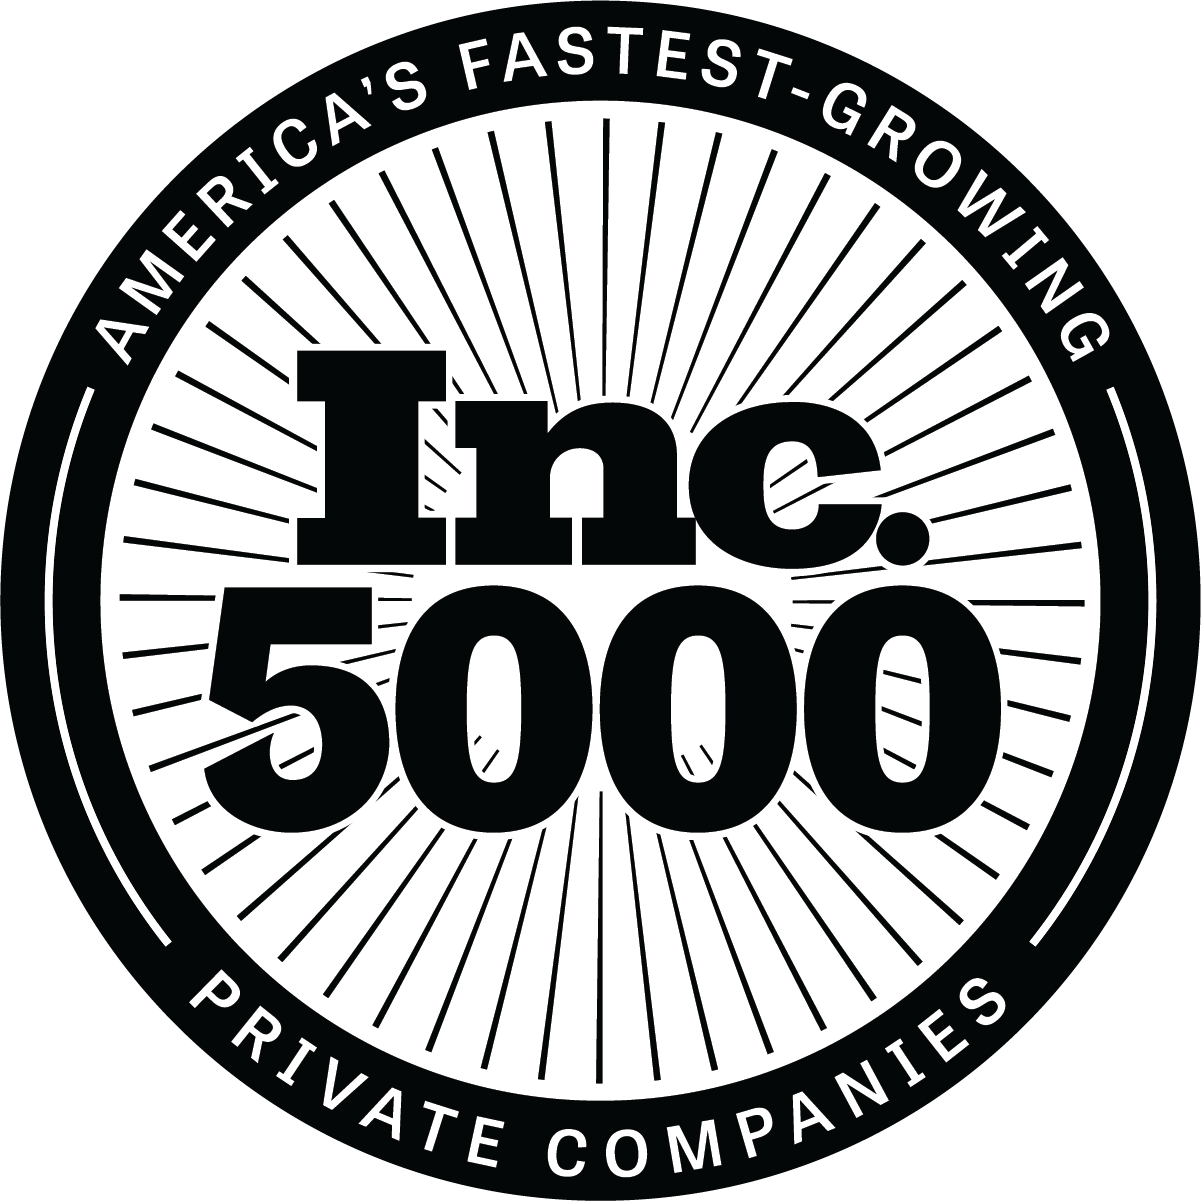 Ethical Supply Chain Leader TO THE MARKET Makes The Inc. 5000 List Of America’s Fastest-Growing Private Companies